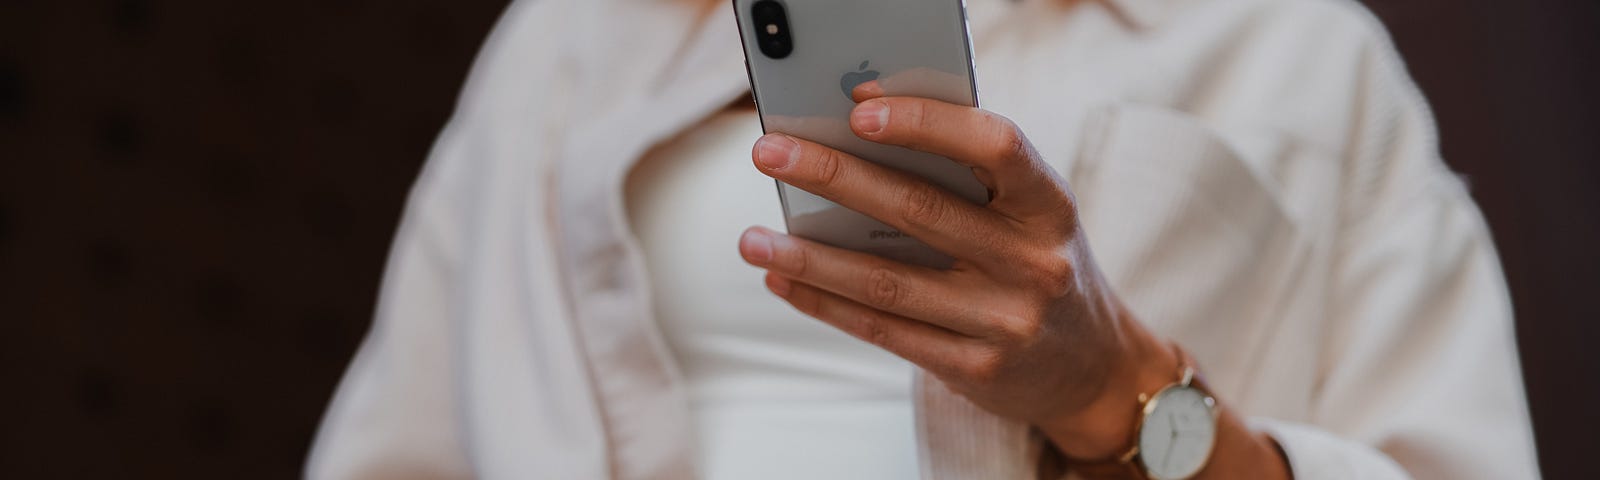 Woman holding a phone in her left hand